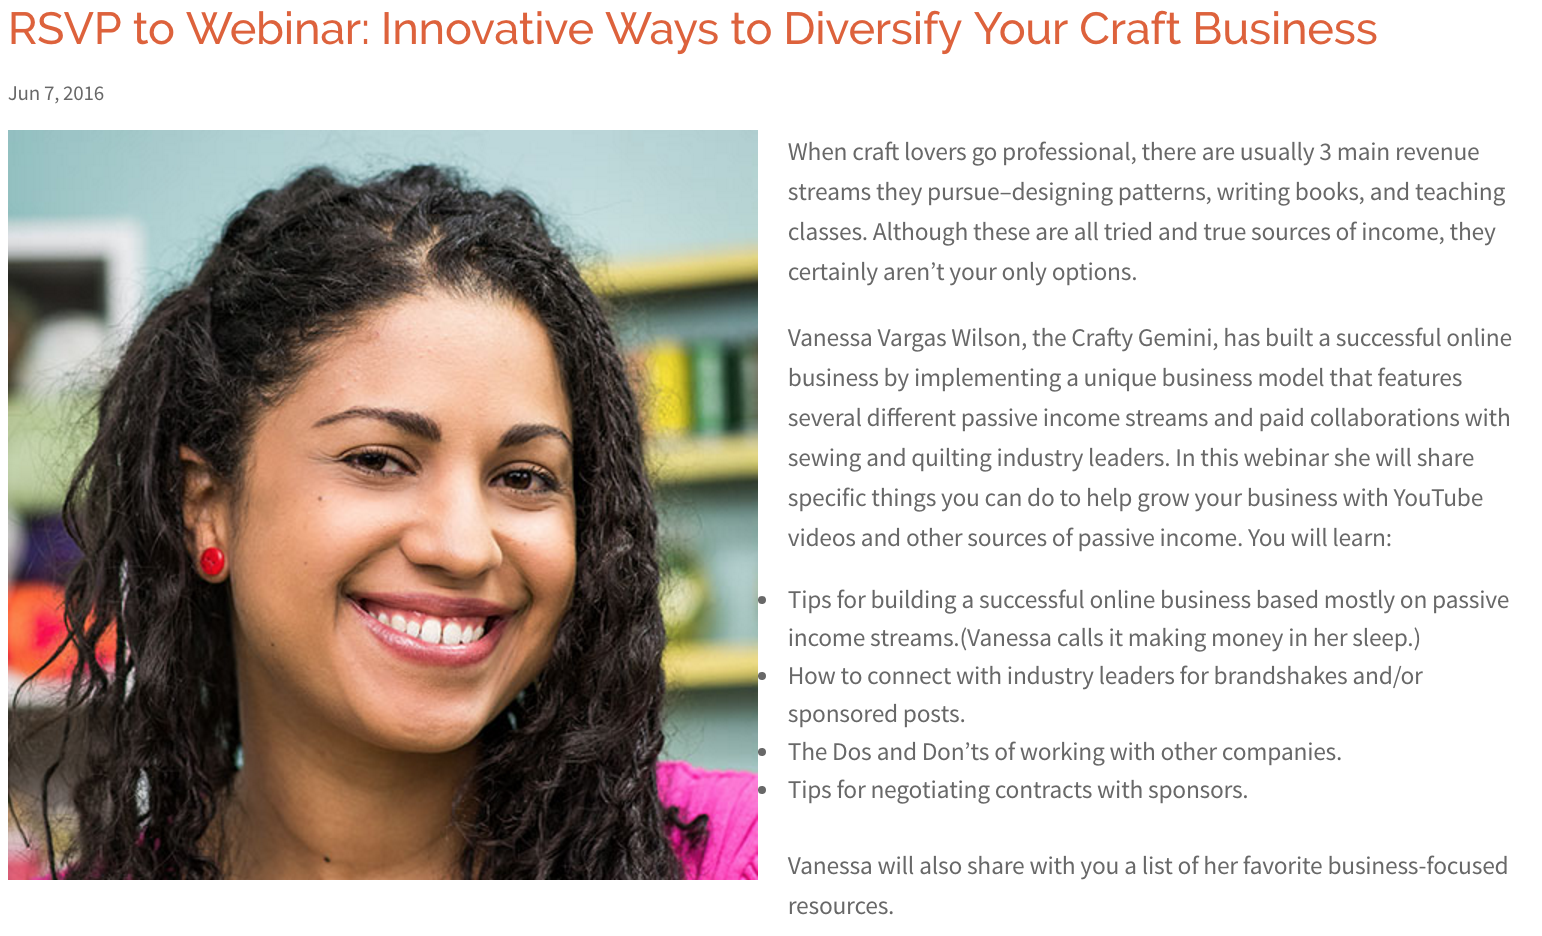 Webinar: Innovative Ways to Diversify Your Craft Business by crafty gemini for Craft Industry Alliance